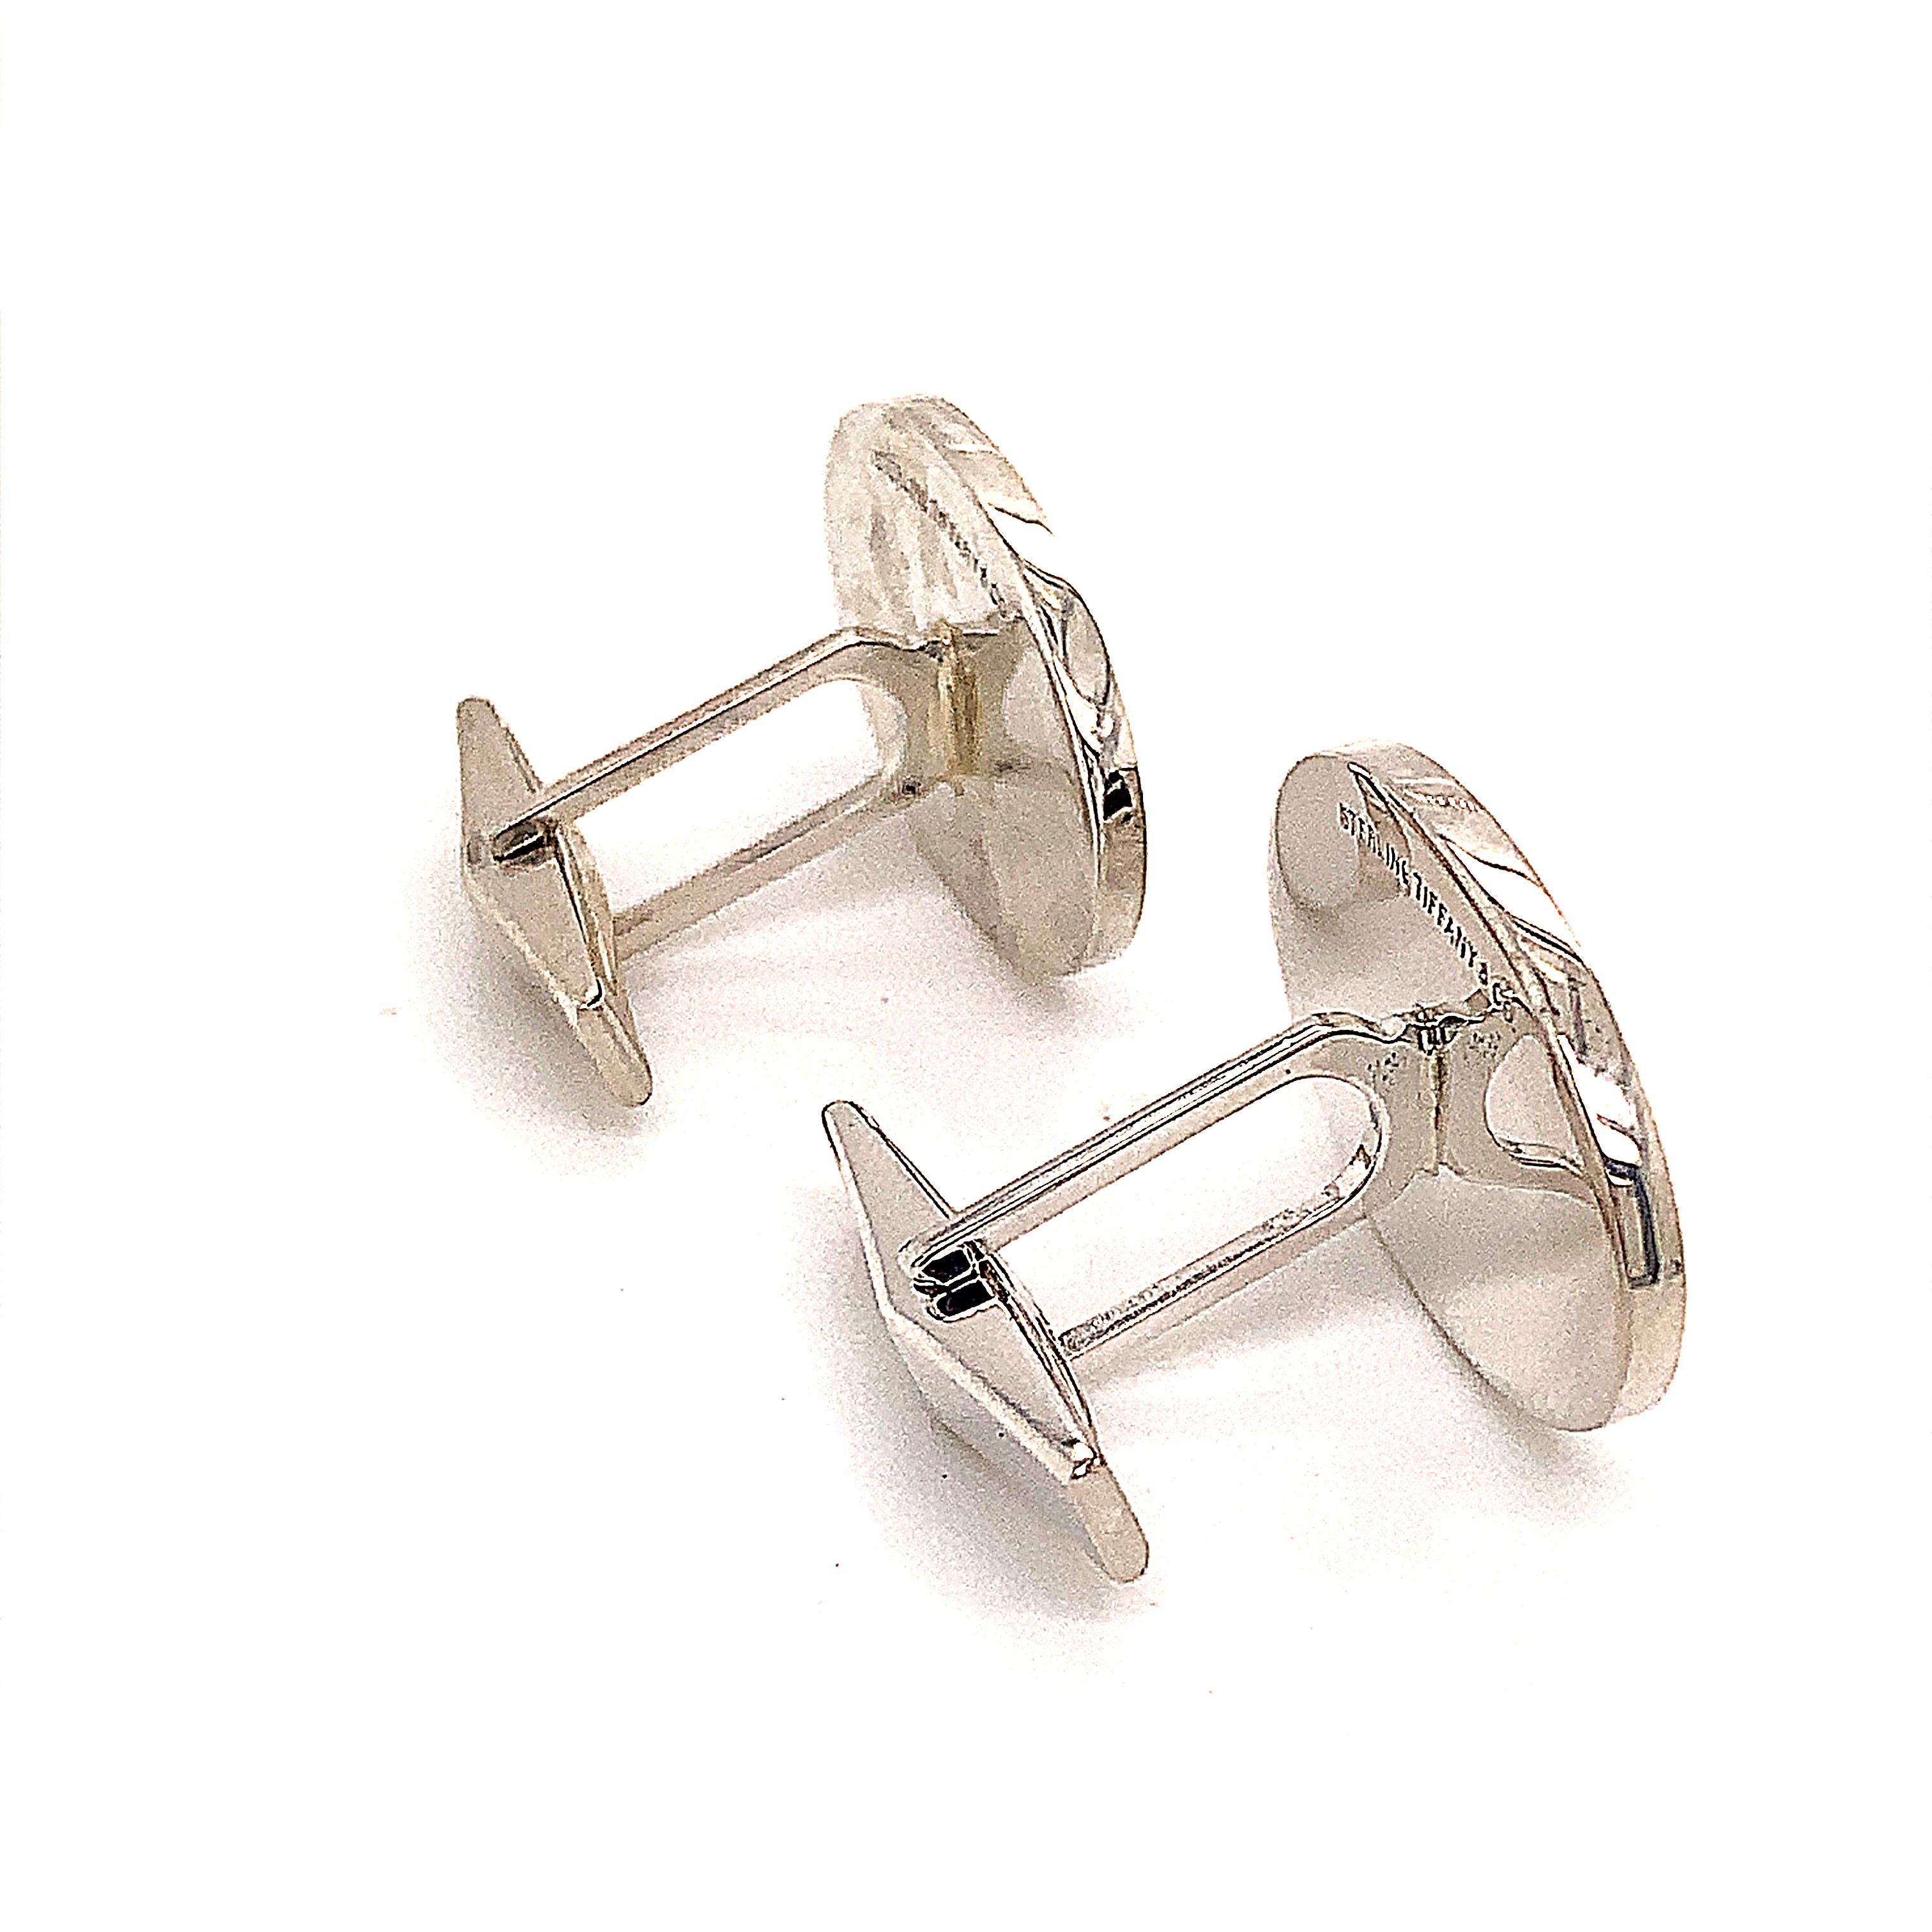 Tiffany & Co. Estate Sterling Silver Wide Oval Cufflinks 19 Grams In Good Condition For Sale In Brooklyn, NY